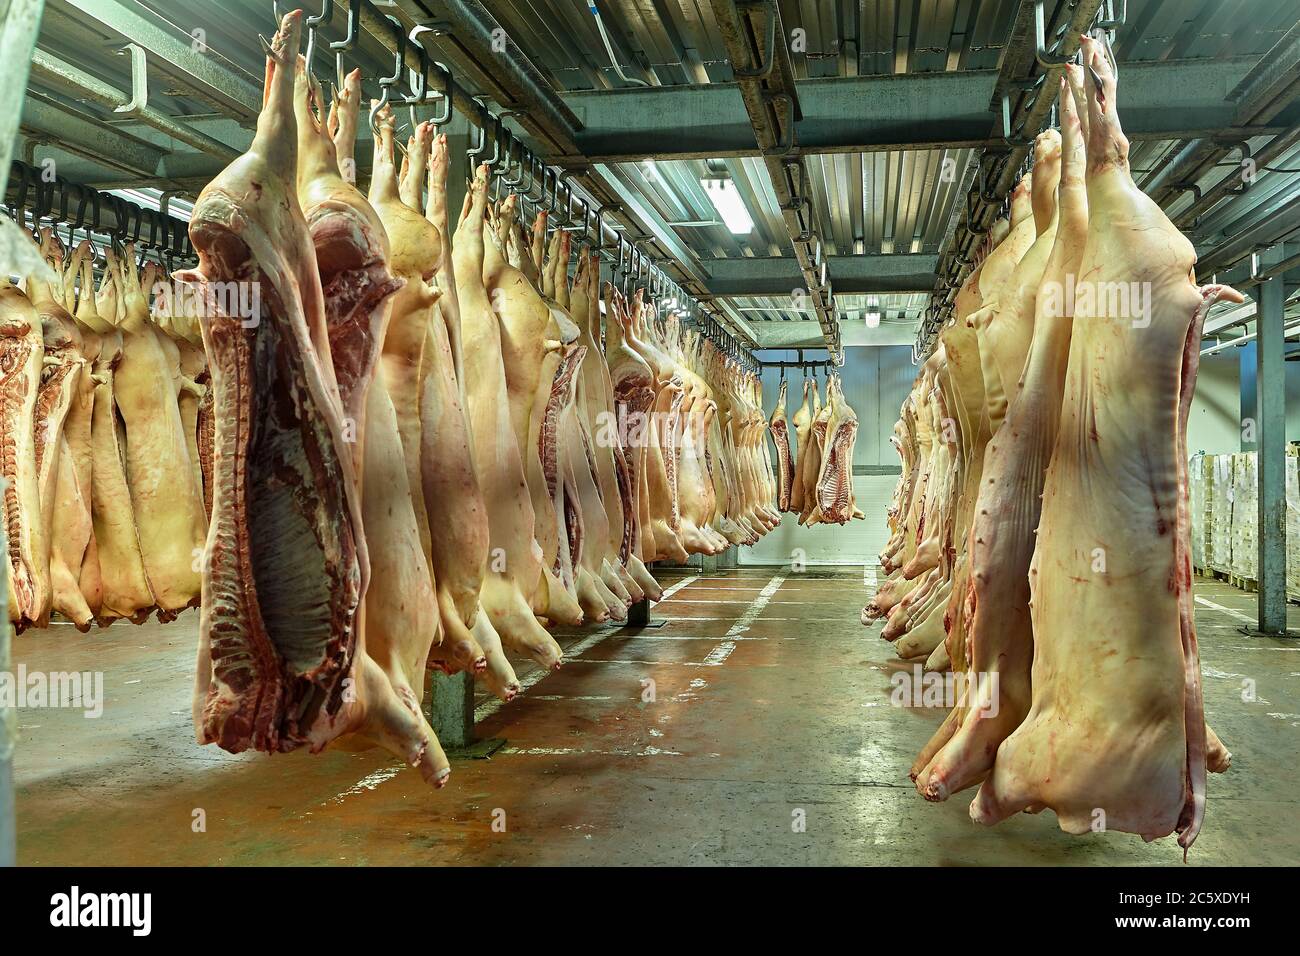 https://c8.alamy.com/comp/2C5XDYH/slaughterhouse-or-butchery-halves-of-pork-carcasses-hanging-on-hooks-in-a-cold-storage-warehouse-frozen-red-meat-in-the-refrigerator-products-of-th-2C5XDYH.jpg